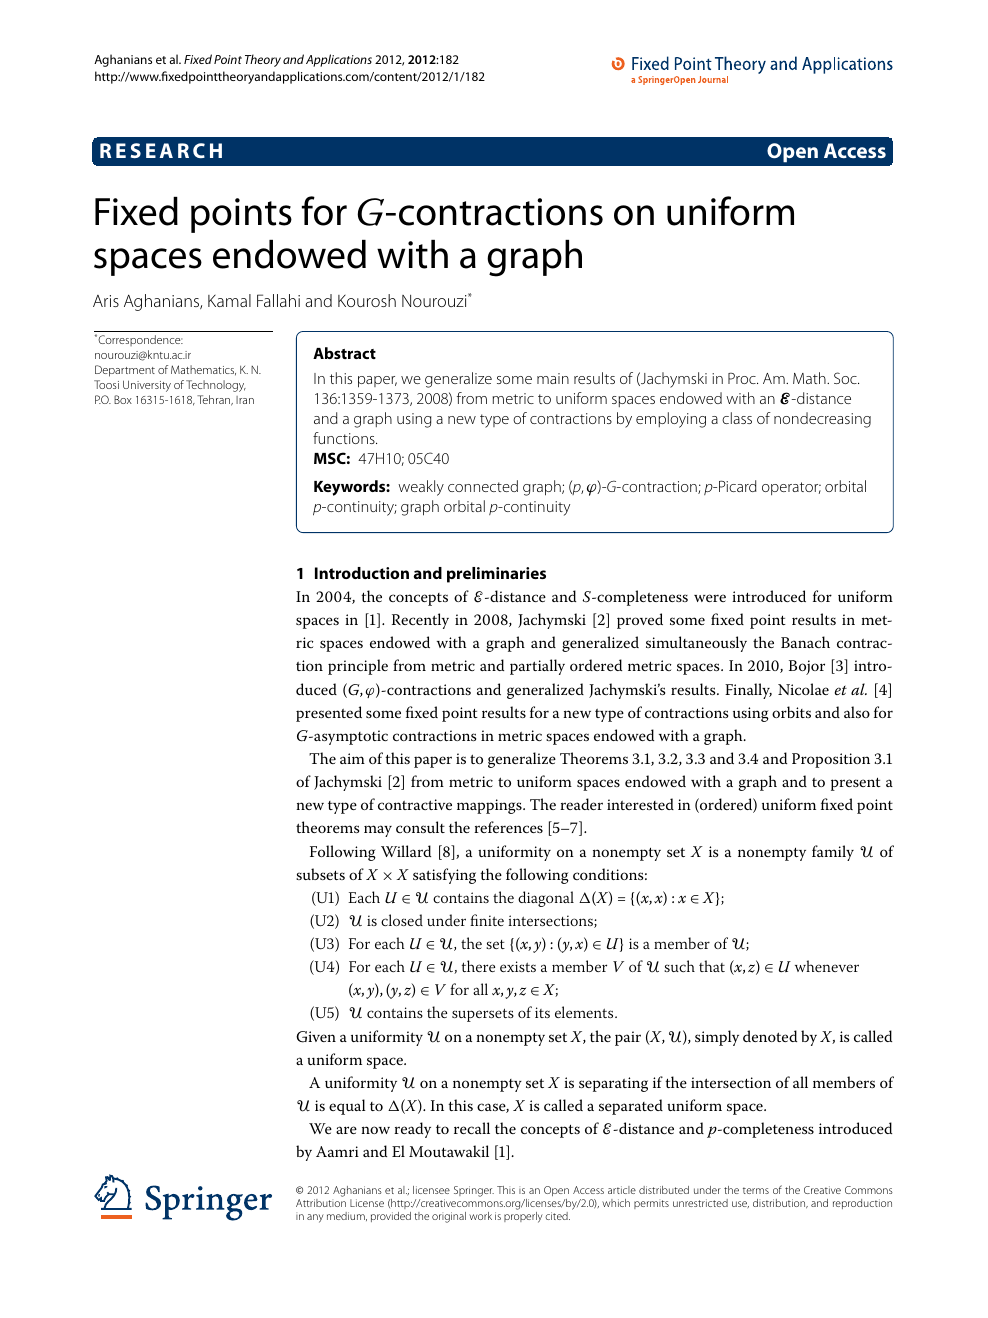 Fixed Points For G Contractions On Uniform Spaces Endowed With A Graph Topic Of Research Paper In Mathematics Download Scholarly Article Pdf And Read For Free On Cyberleninka Open Science Hub